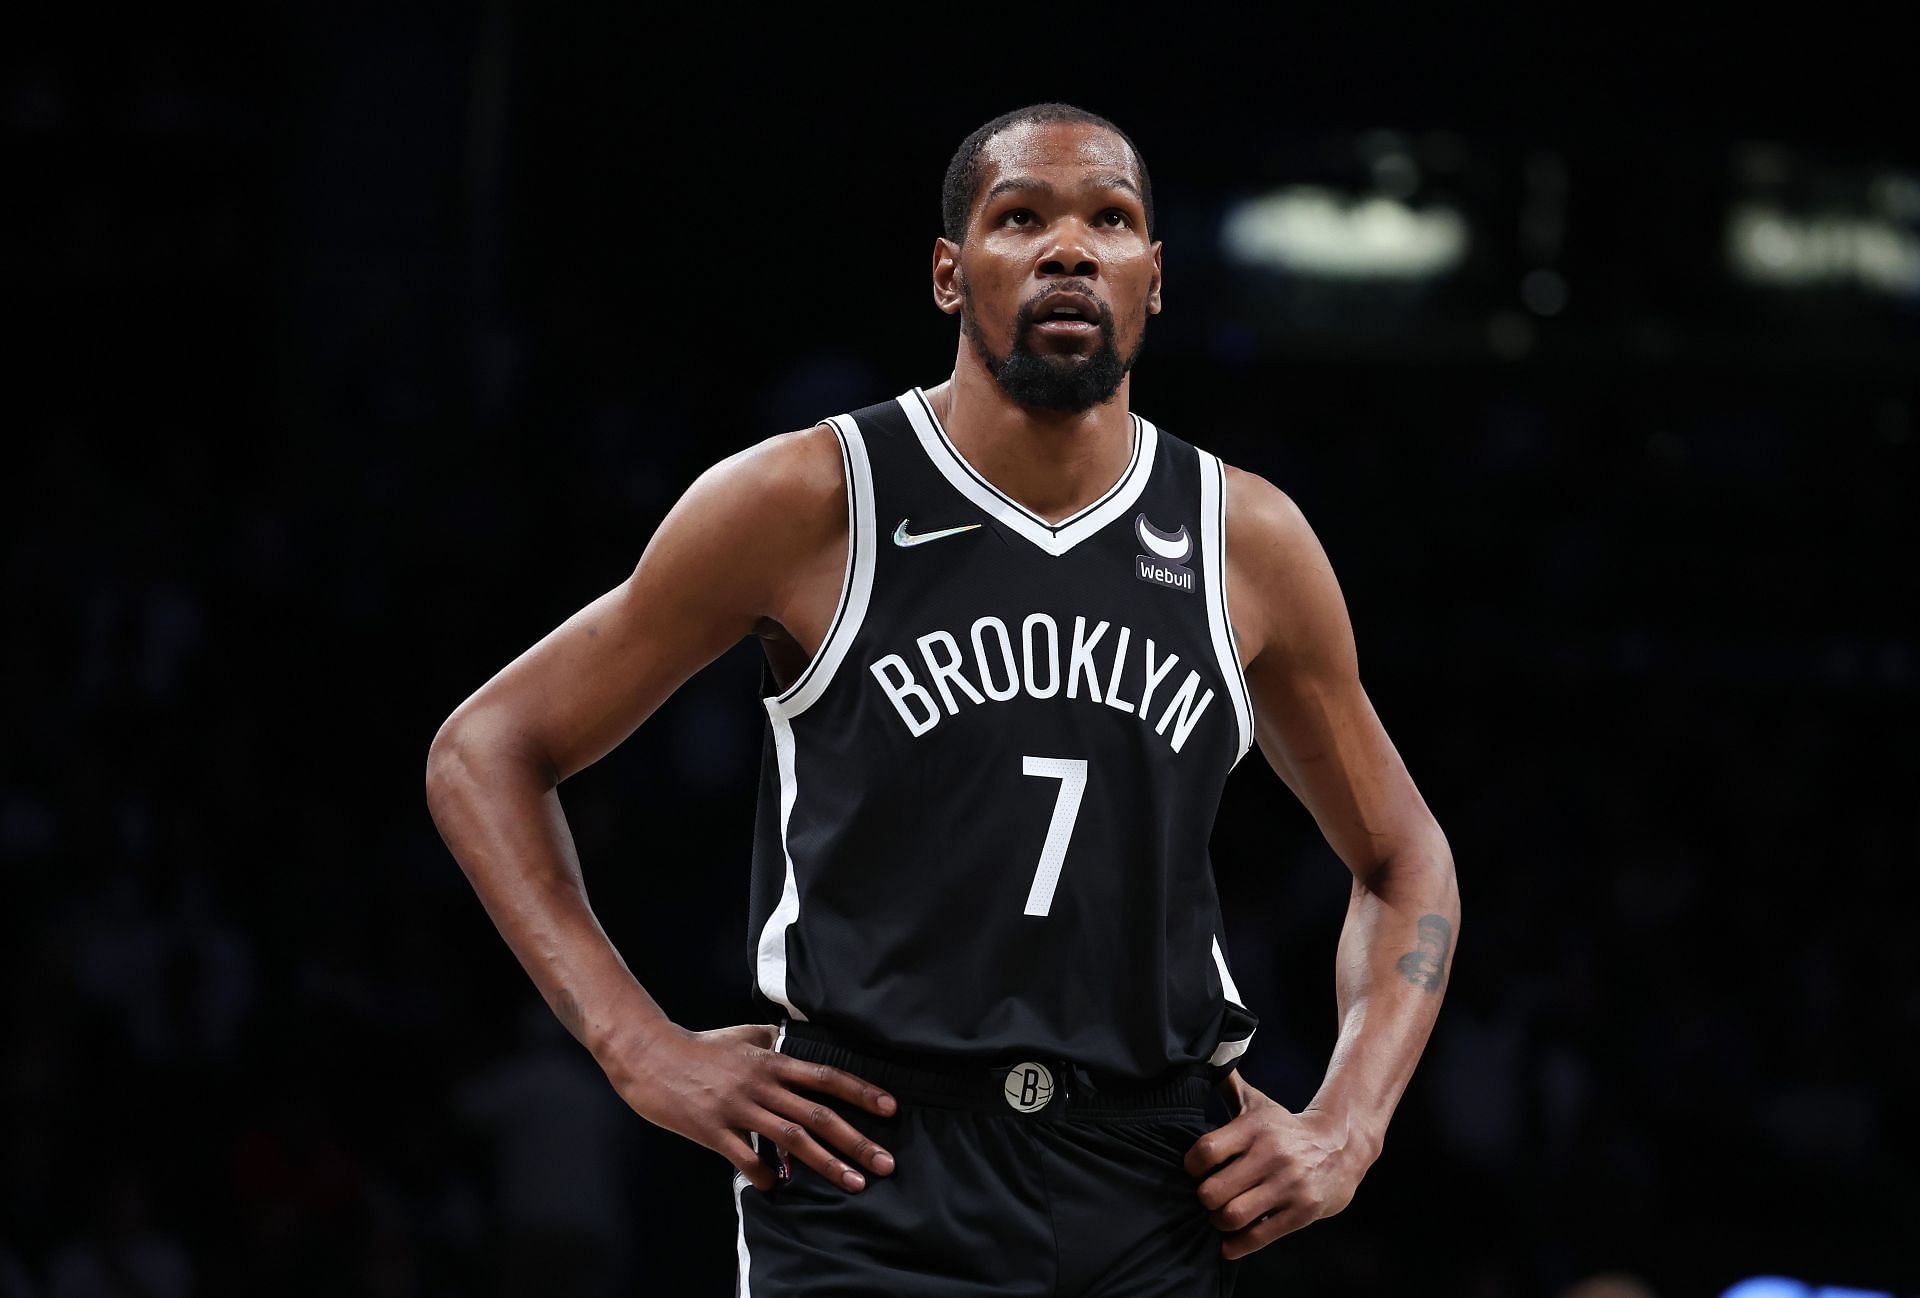 Kevin Durant of the Brooklyn Nets looks on against the Dallas Mavericks during their game at Barclays Center on Wednesday in New York City.